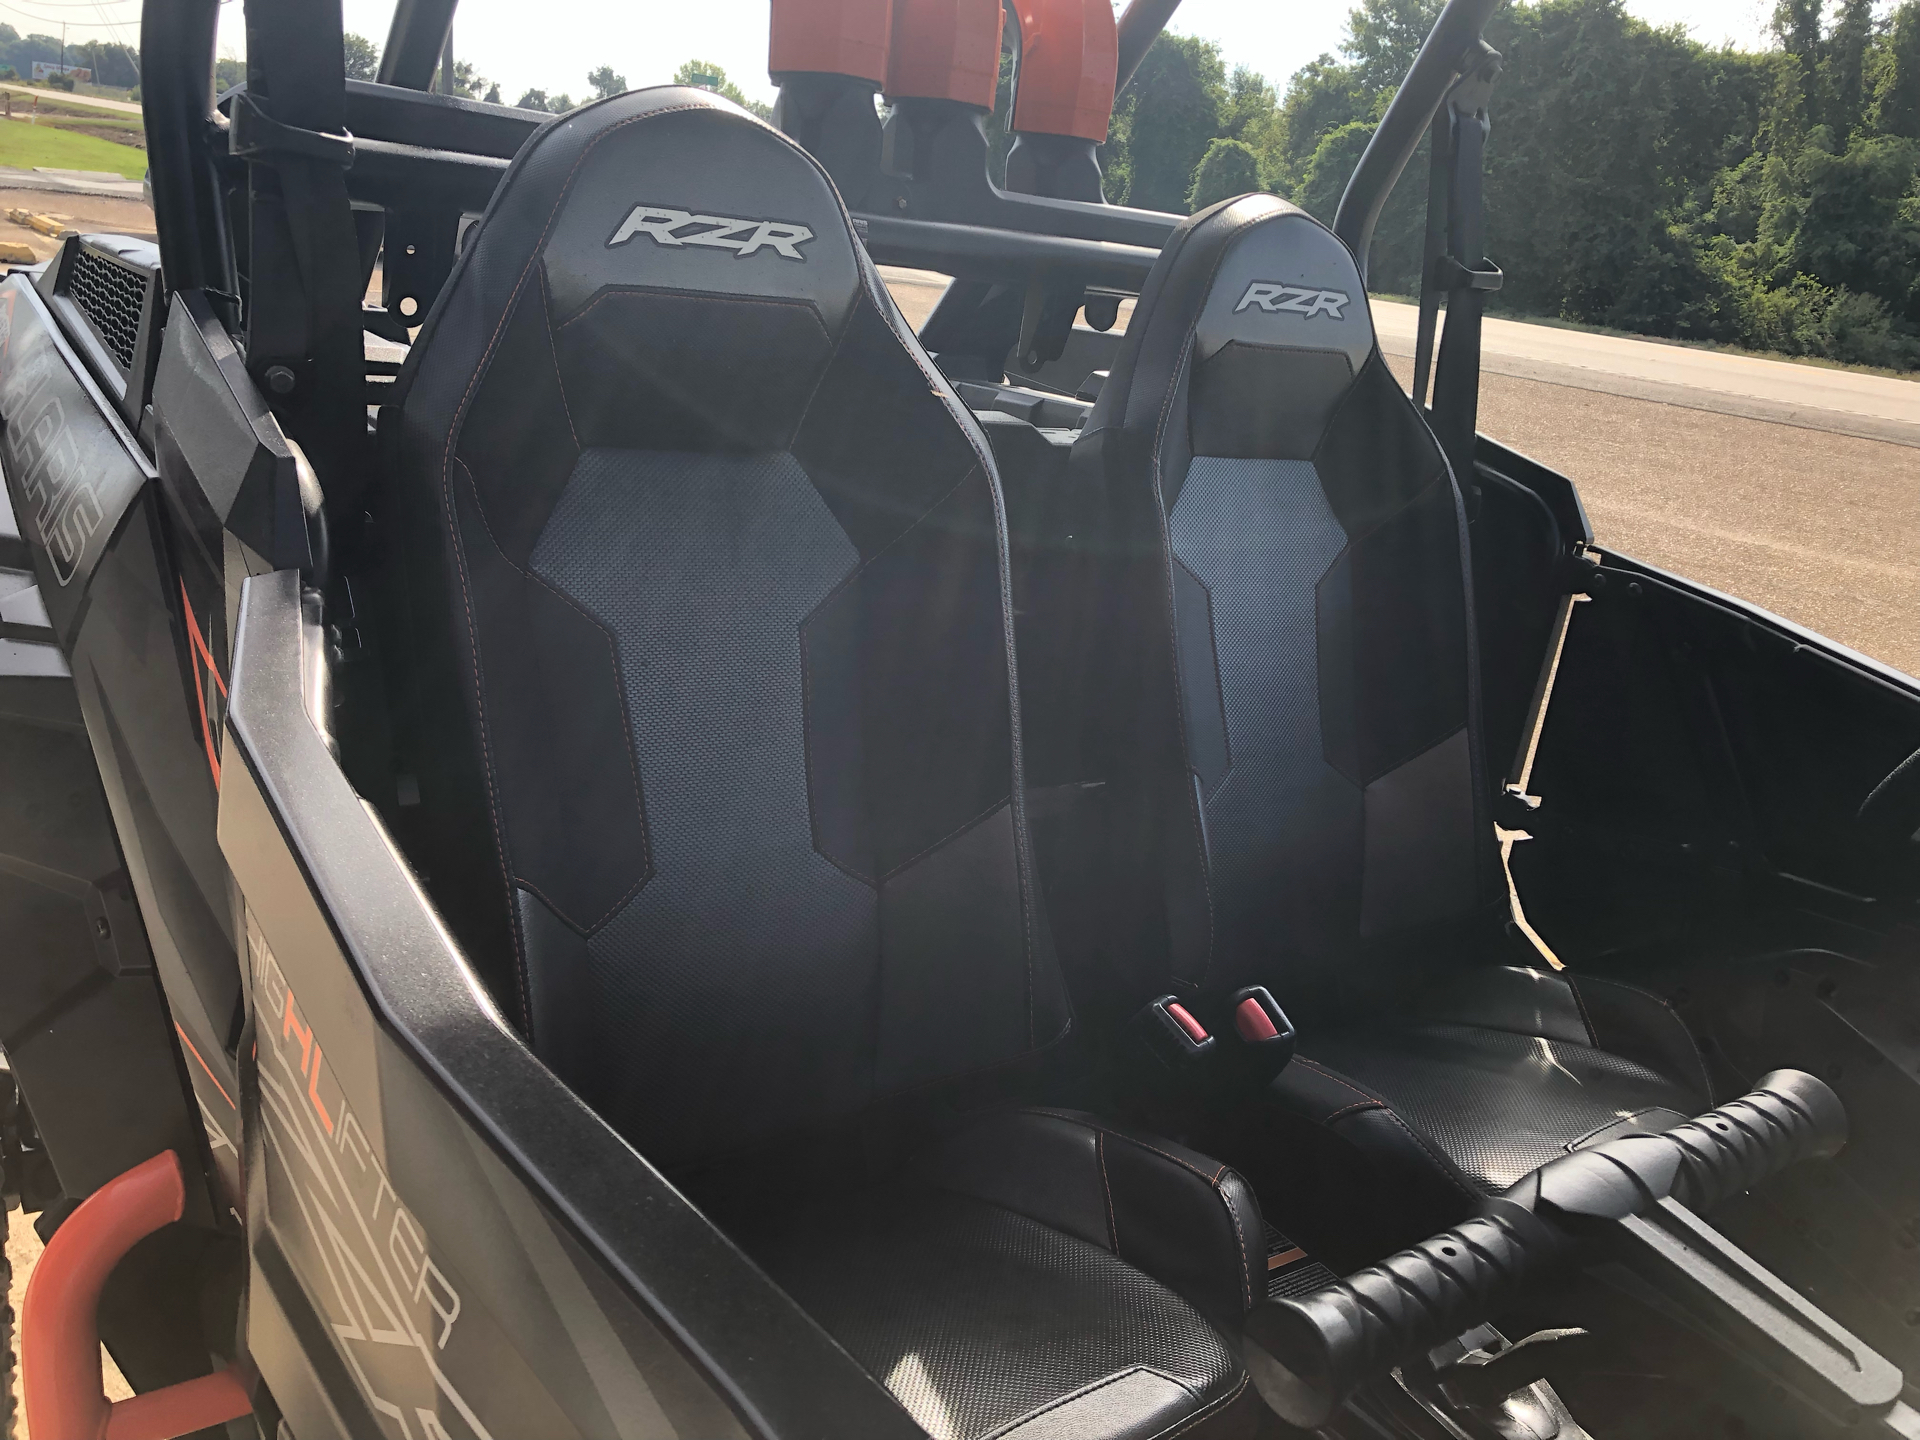 2019 Polaris RZR XP 1000 High Lifter in Leland, Mississippi - Photo 11